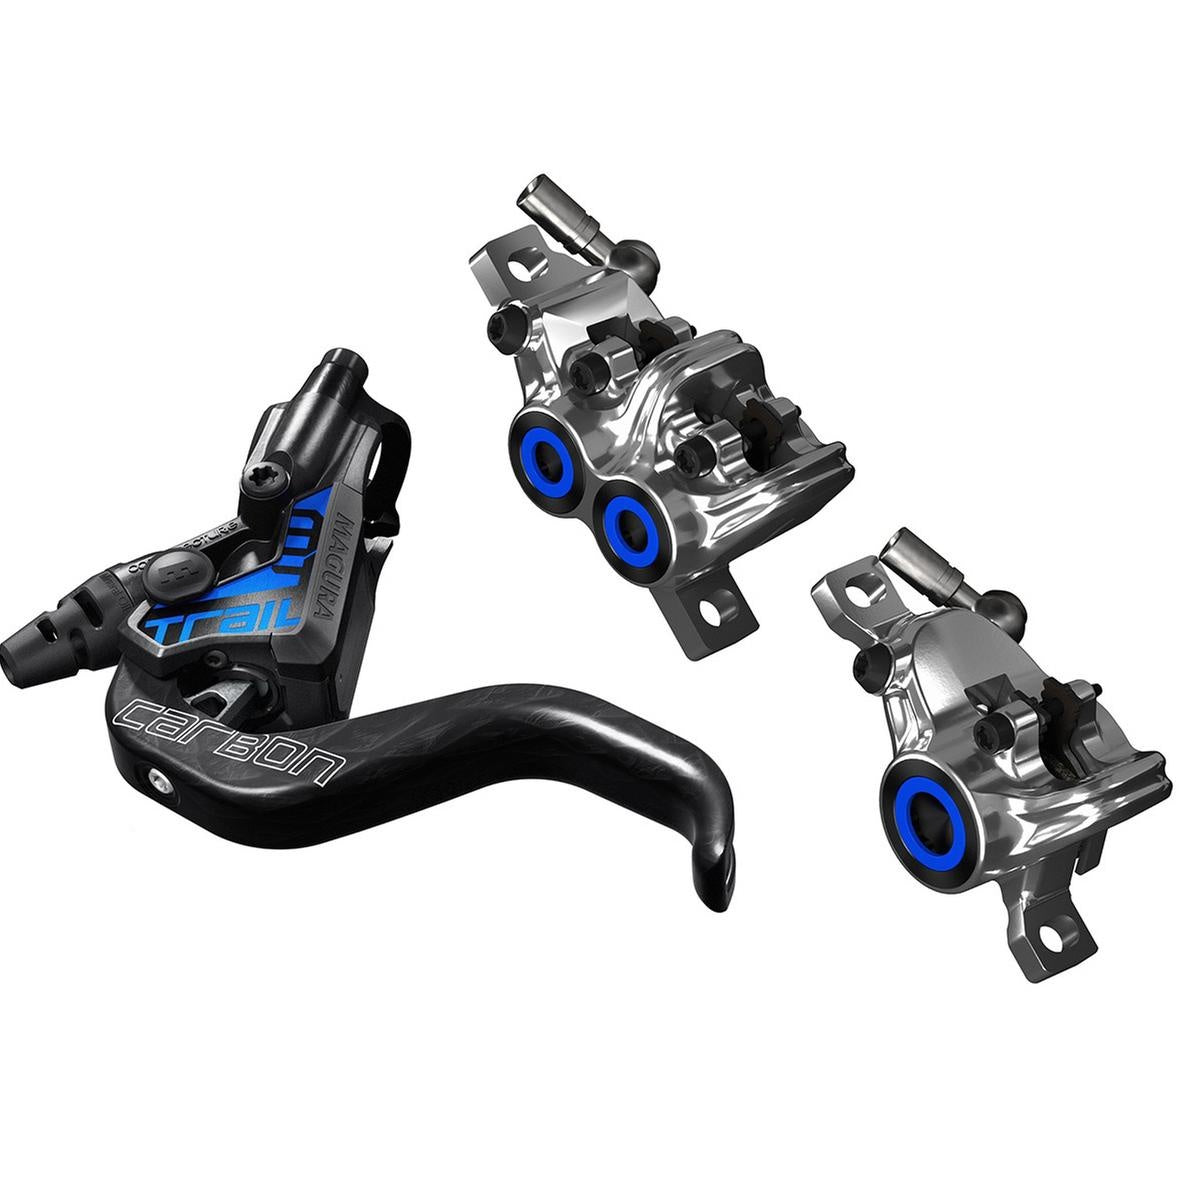 Magura MT Trail SL HC Disc Brake Set 1-FINGER HC-CARBOLAY® LEVER BLADES,  Suitable For Mounting Left or Right. 2701646